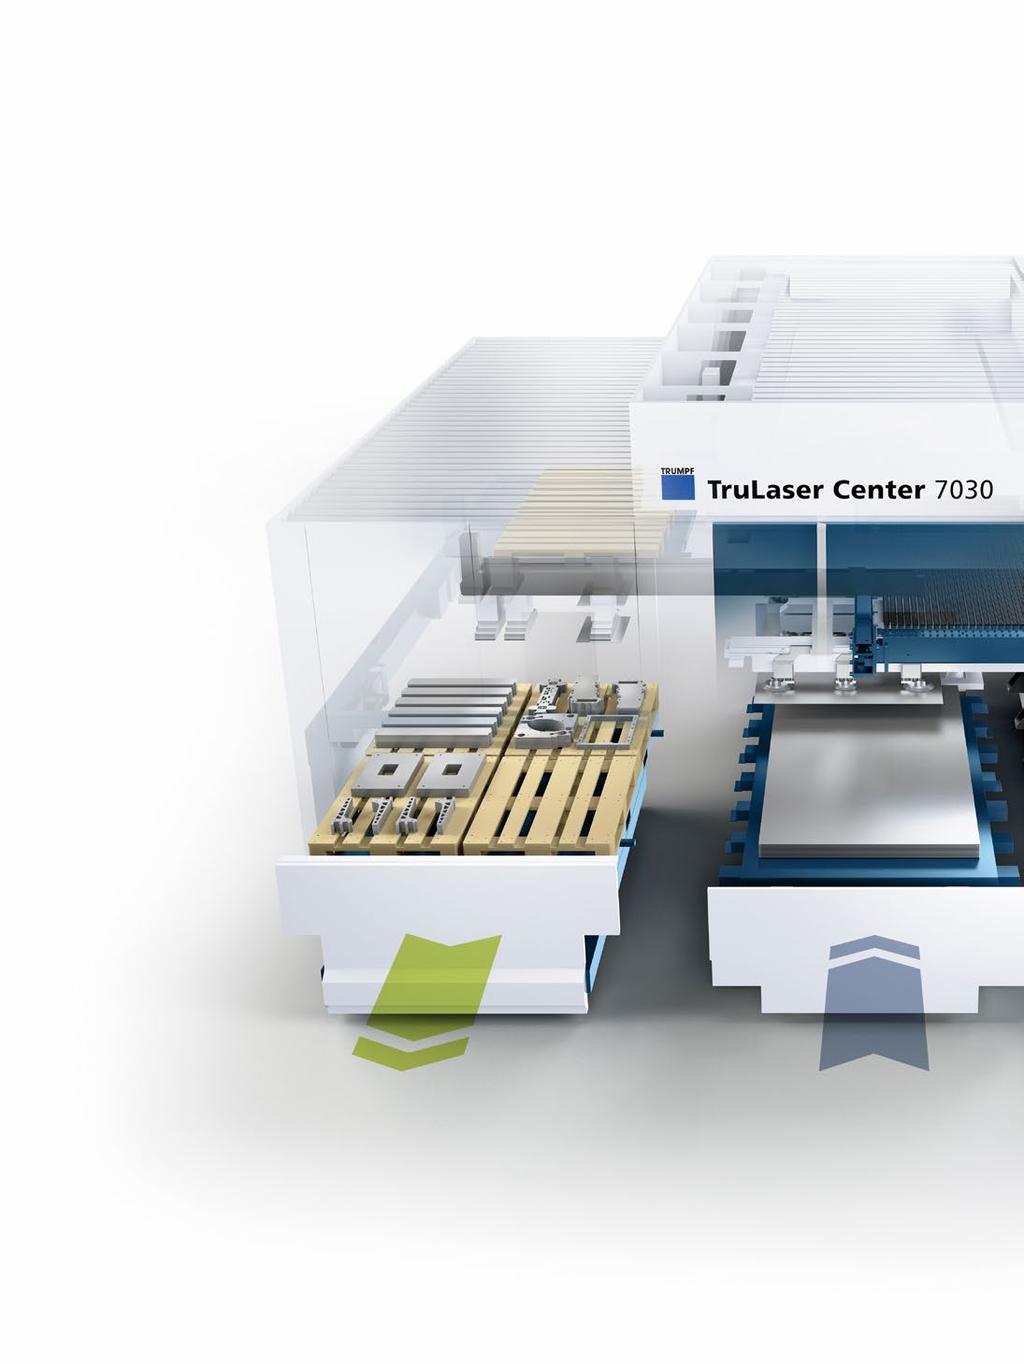 40 Products Center 7030 Make short work of your laser production processes This fully automated complete concept reduces your processing costs by up to 30% and opens up unprecedented opportunities